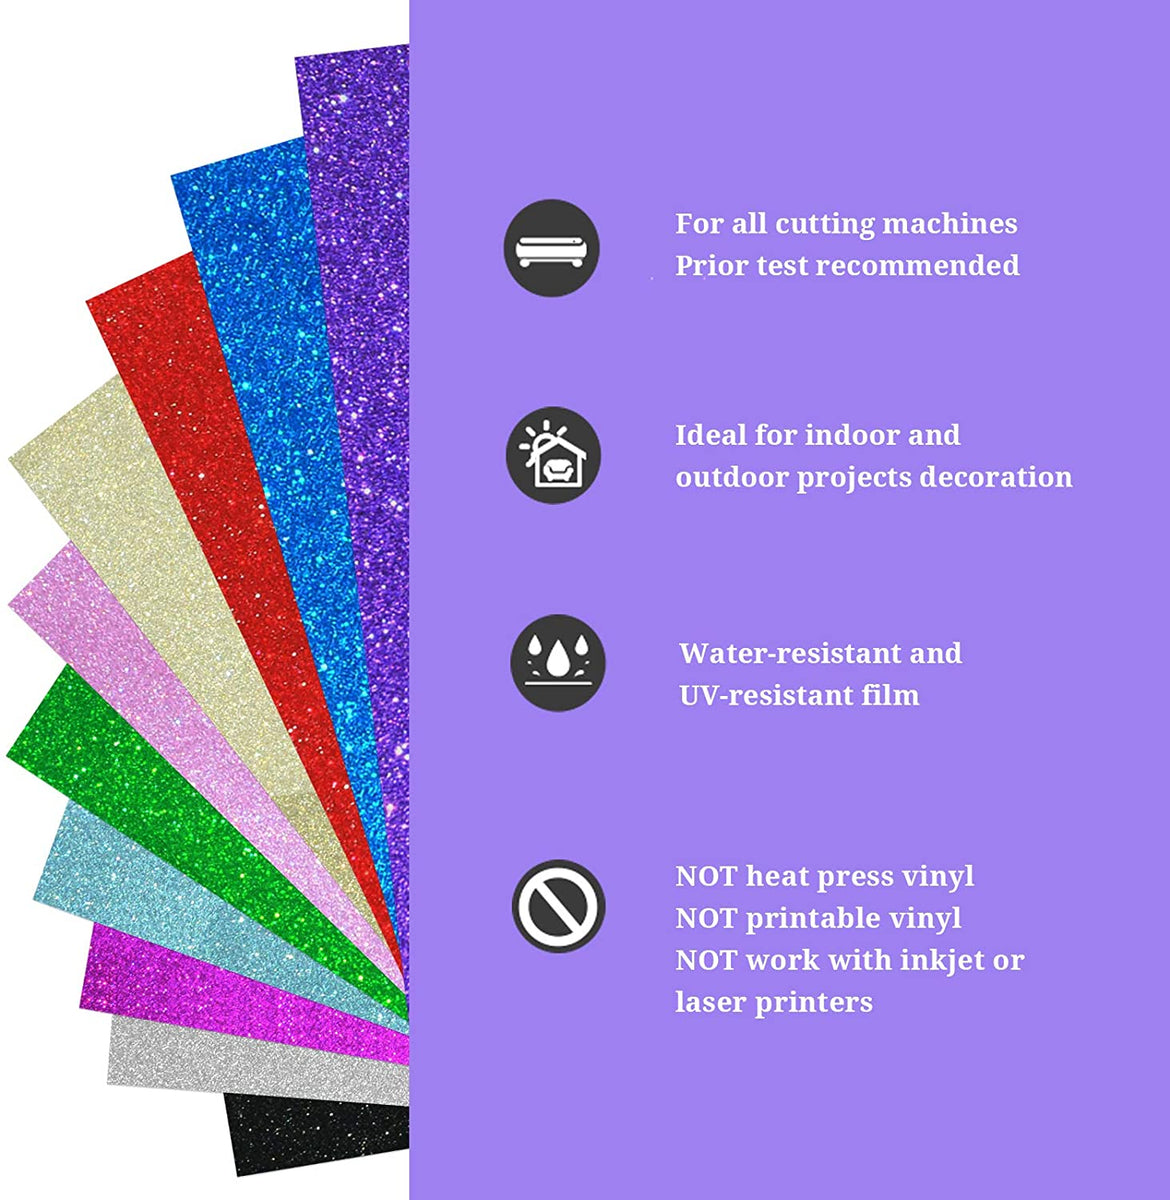 3pcs Self-Adhesive Vinyl Sheets Craft Making Accessory DIY Material for Home, Size: 30x25x0.1cm